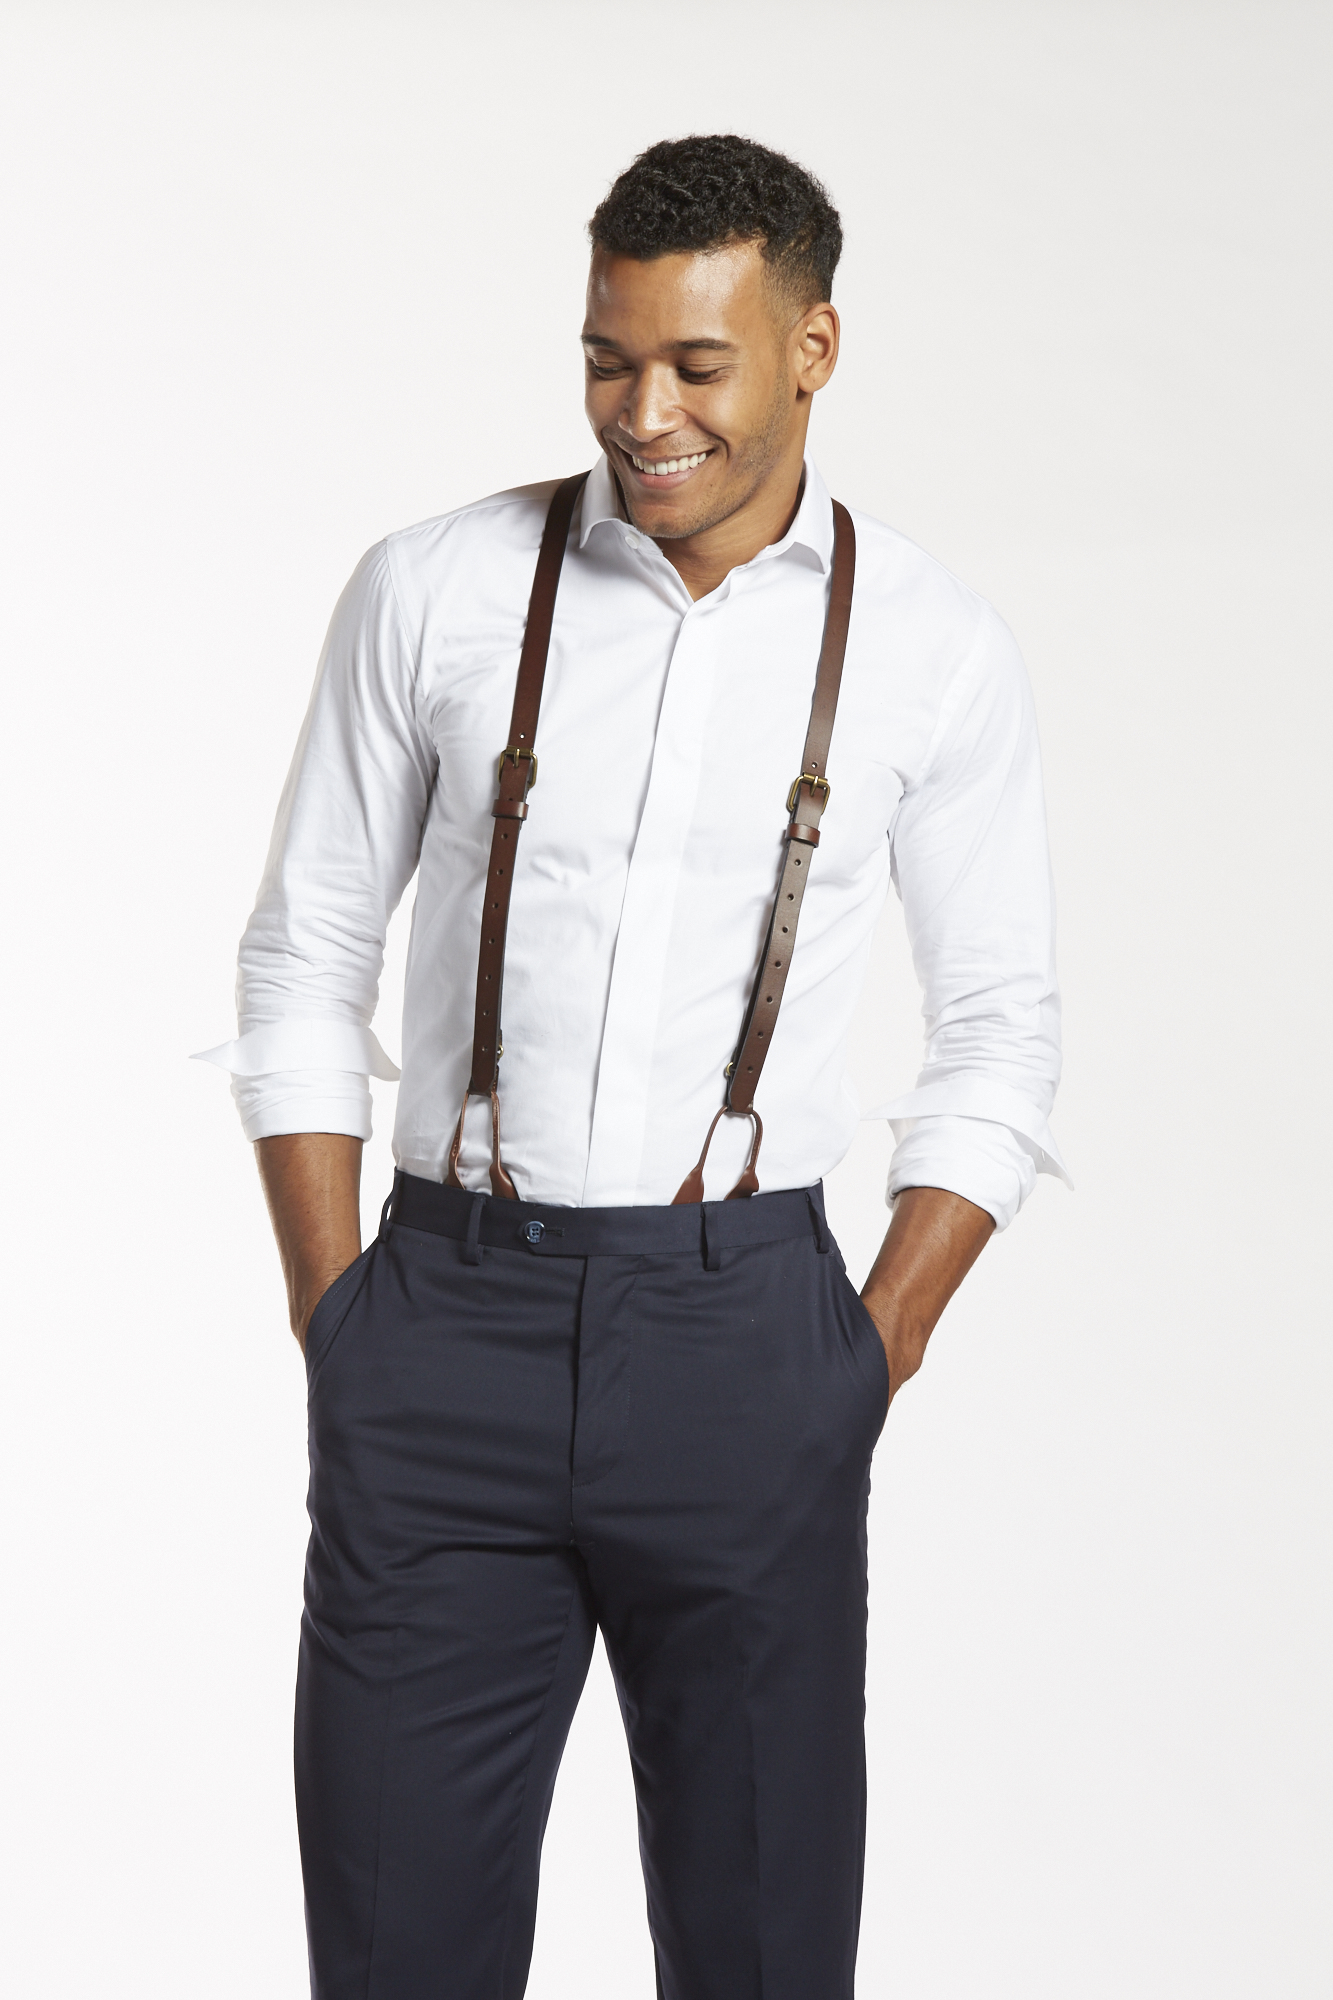 How to Style Suspenders For Men | SuitShop